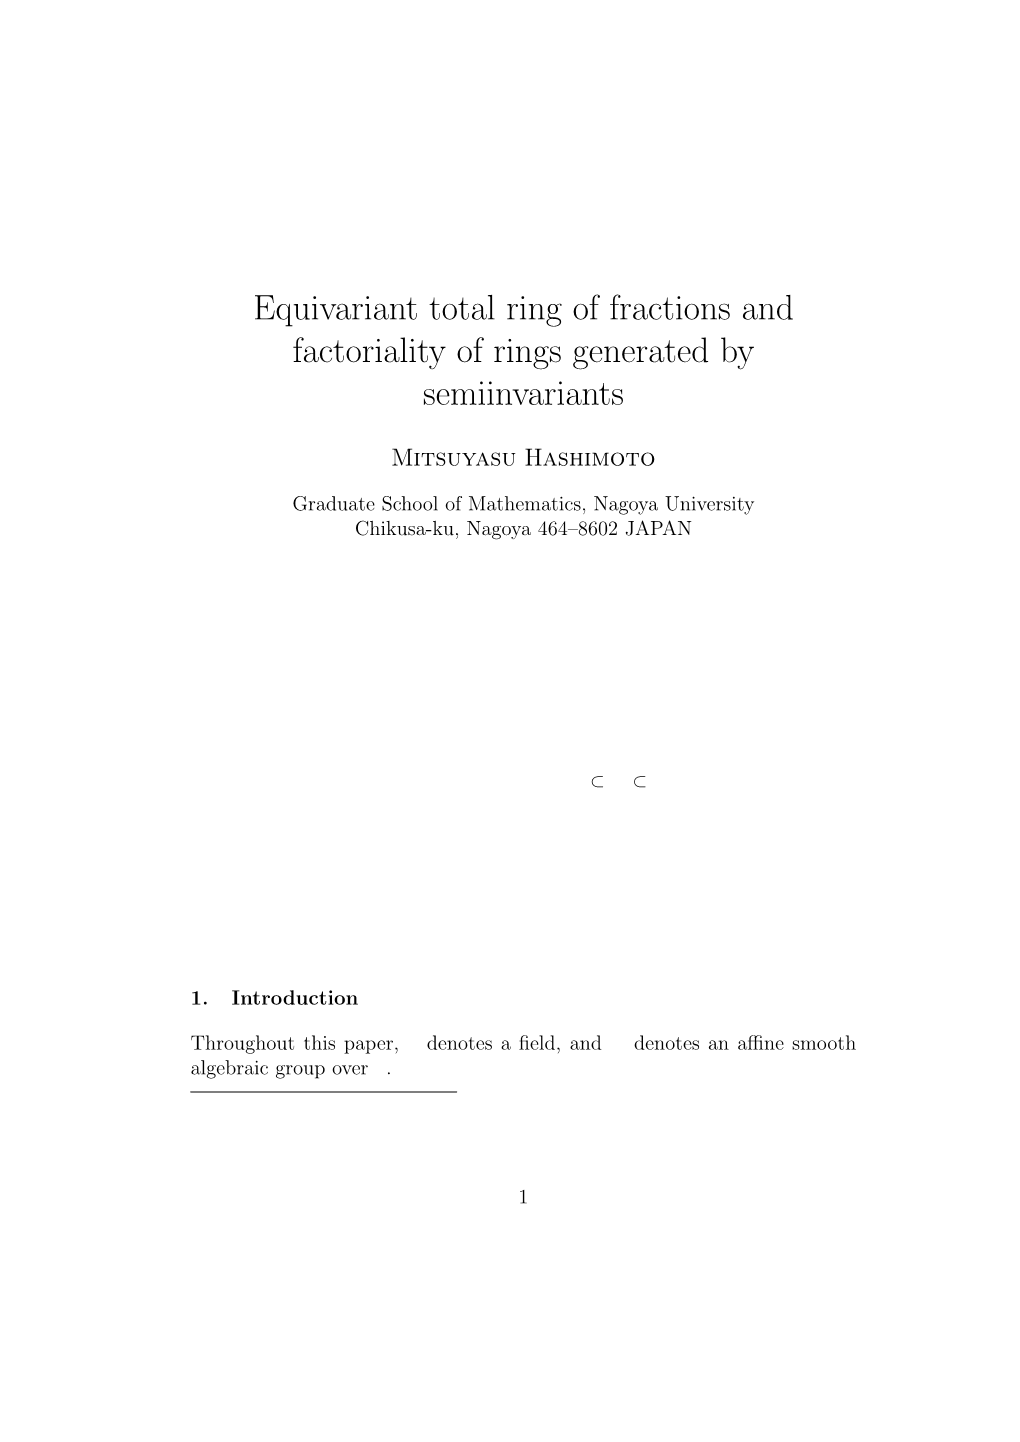 Equivariant Total Ring of Fractions and Factoriality of Rings Generated by Semiinvariants